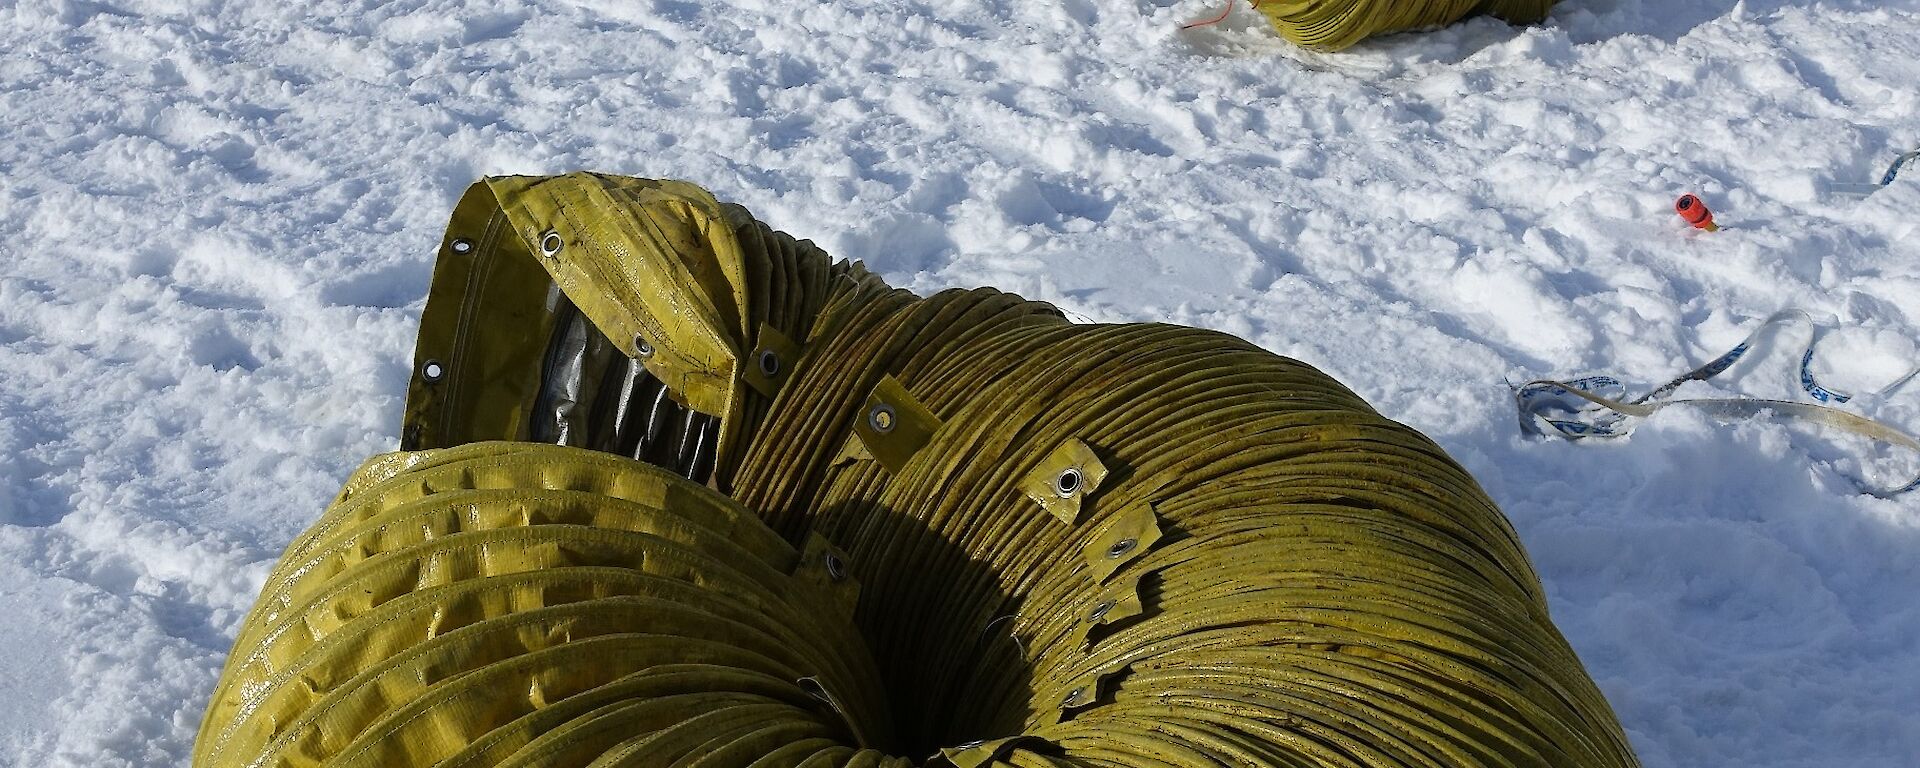 The yellow ducting dismantled into its original 10m long sections and tied up on the sea ice, ready to be transported back to station